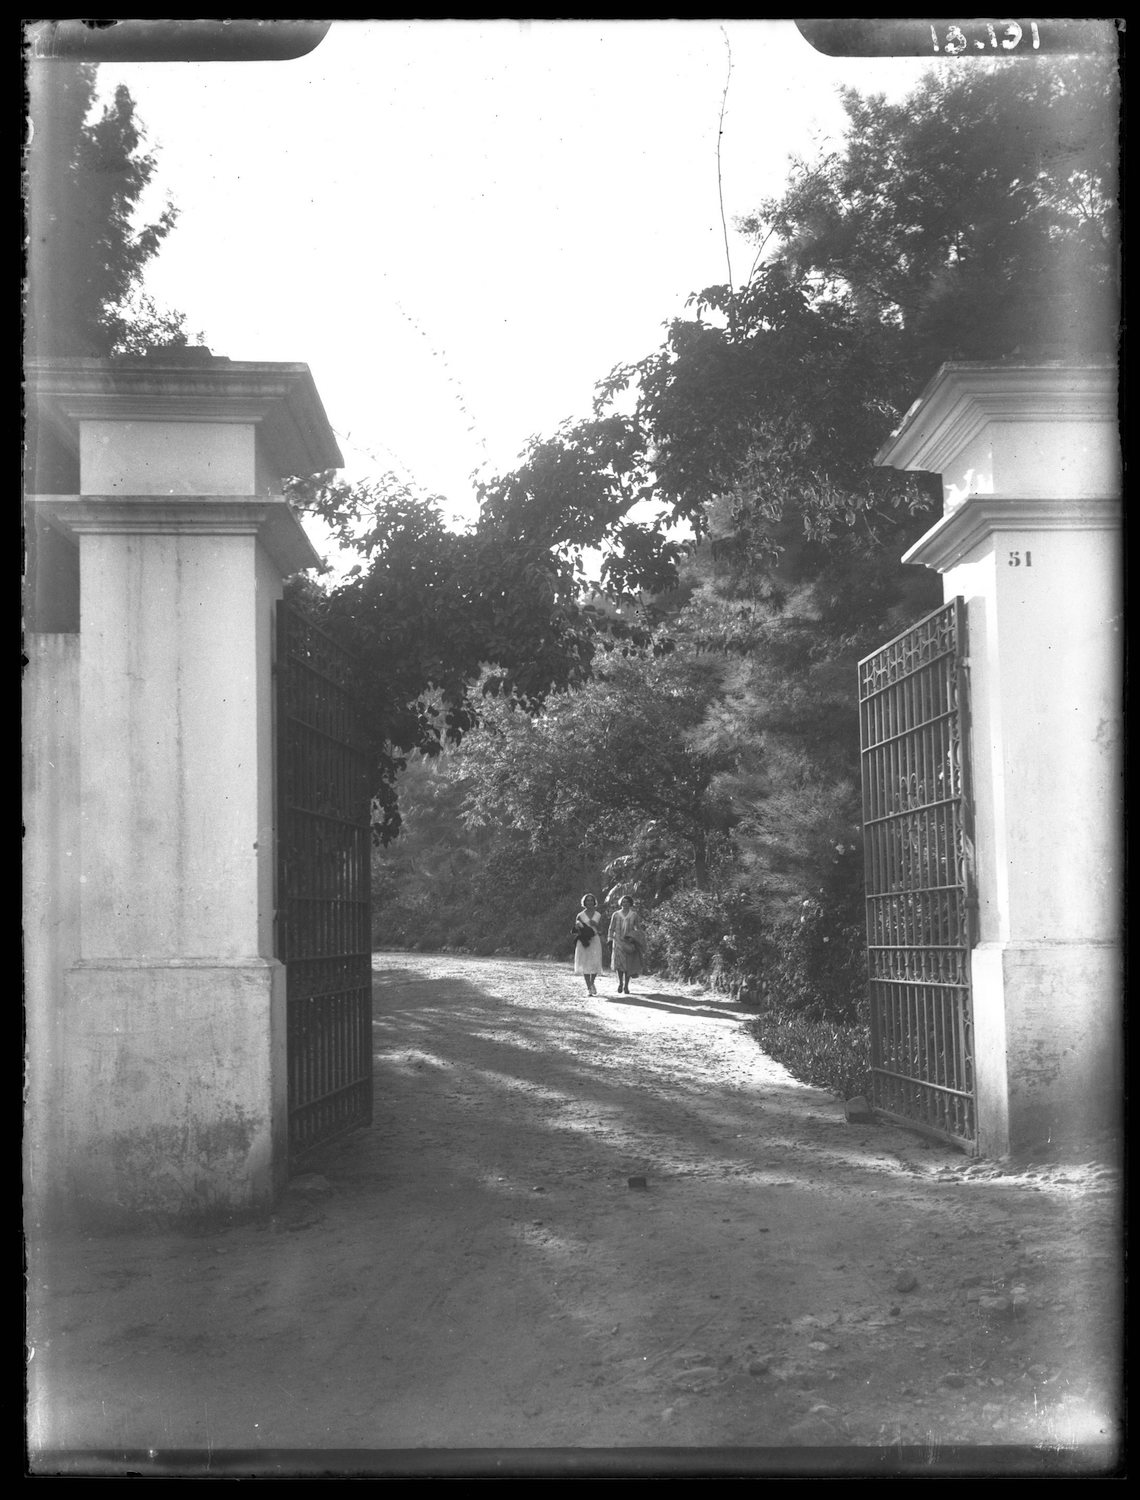 Two women in European dress walk towards the entrance gate of house number 51.